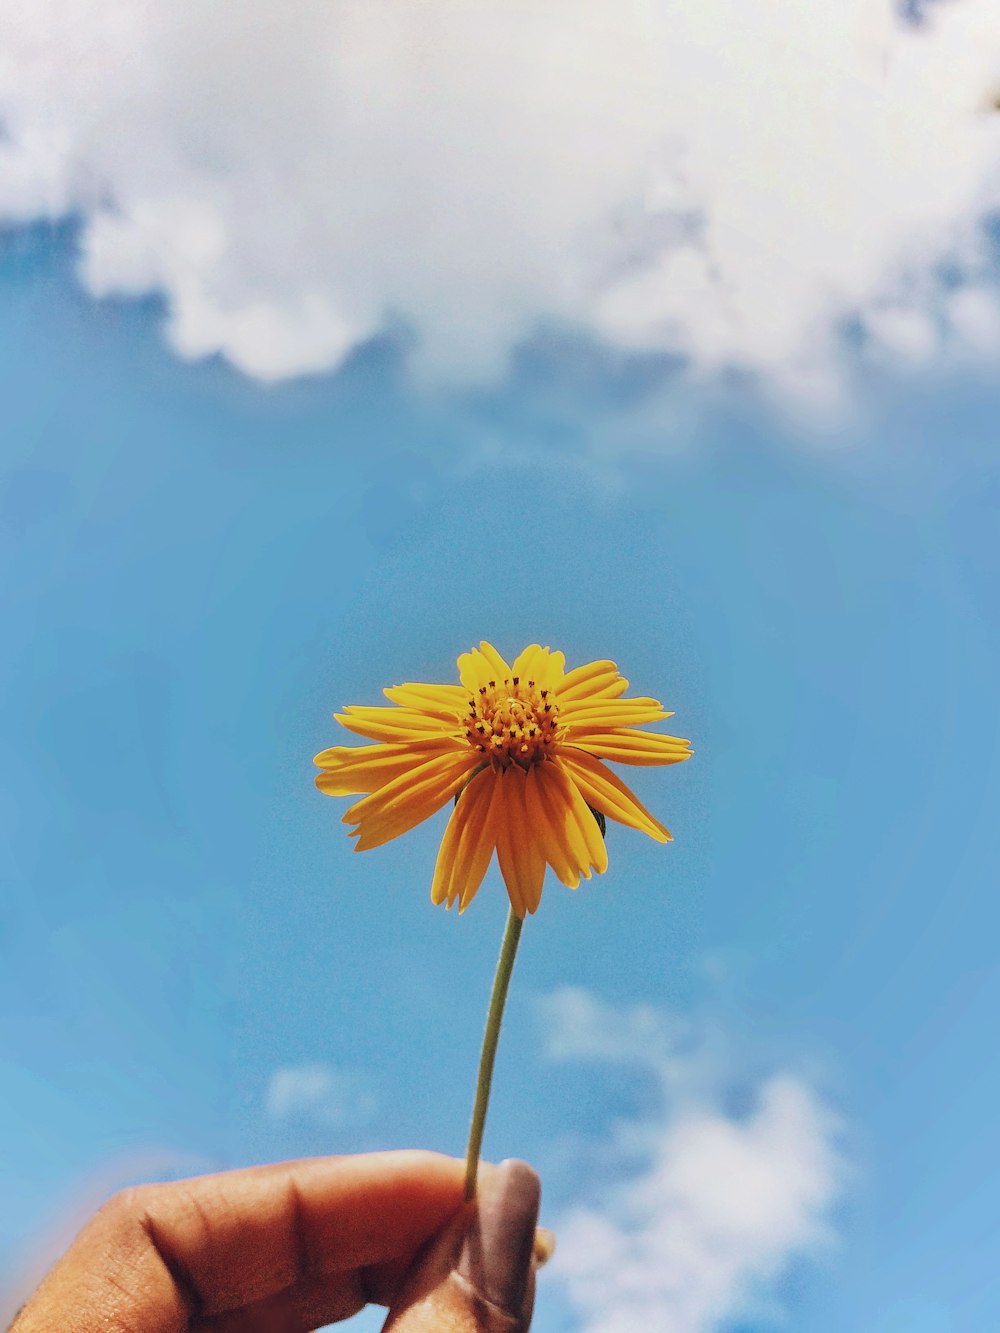 1500 Flowers Aesthetic Pictures Download Free Images On Unsplash